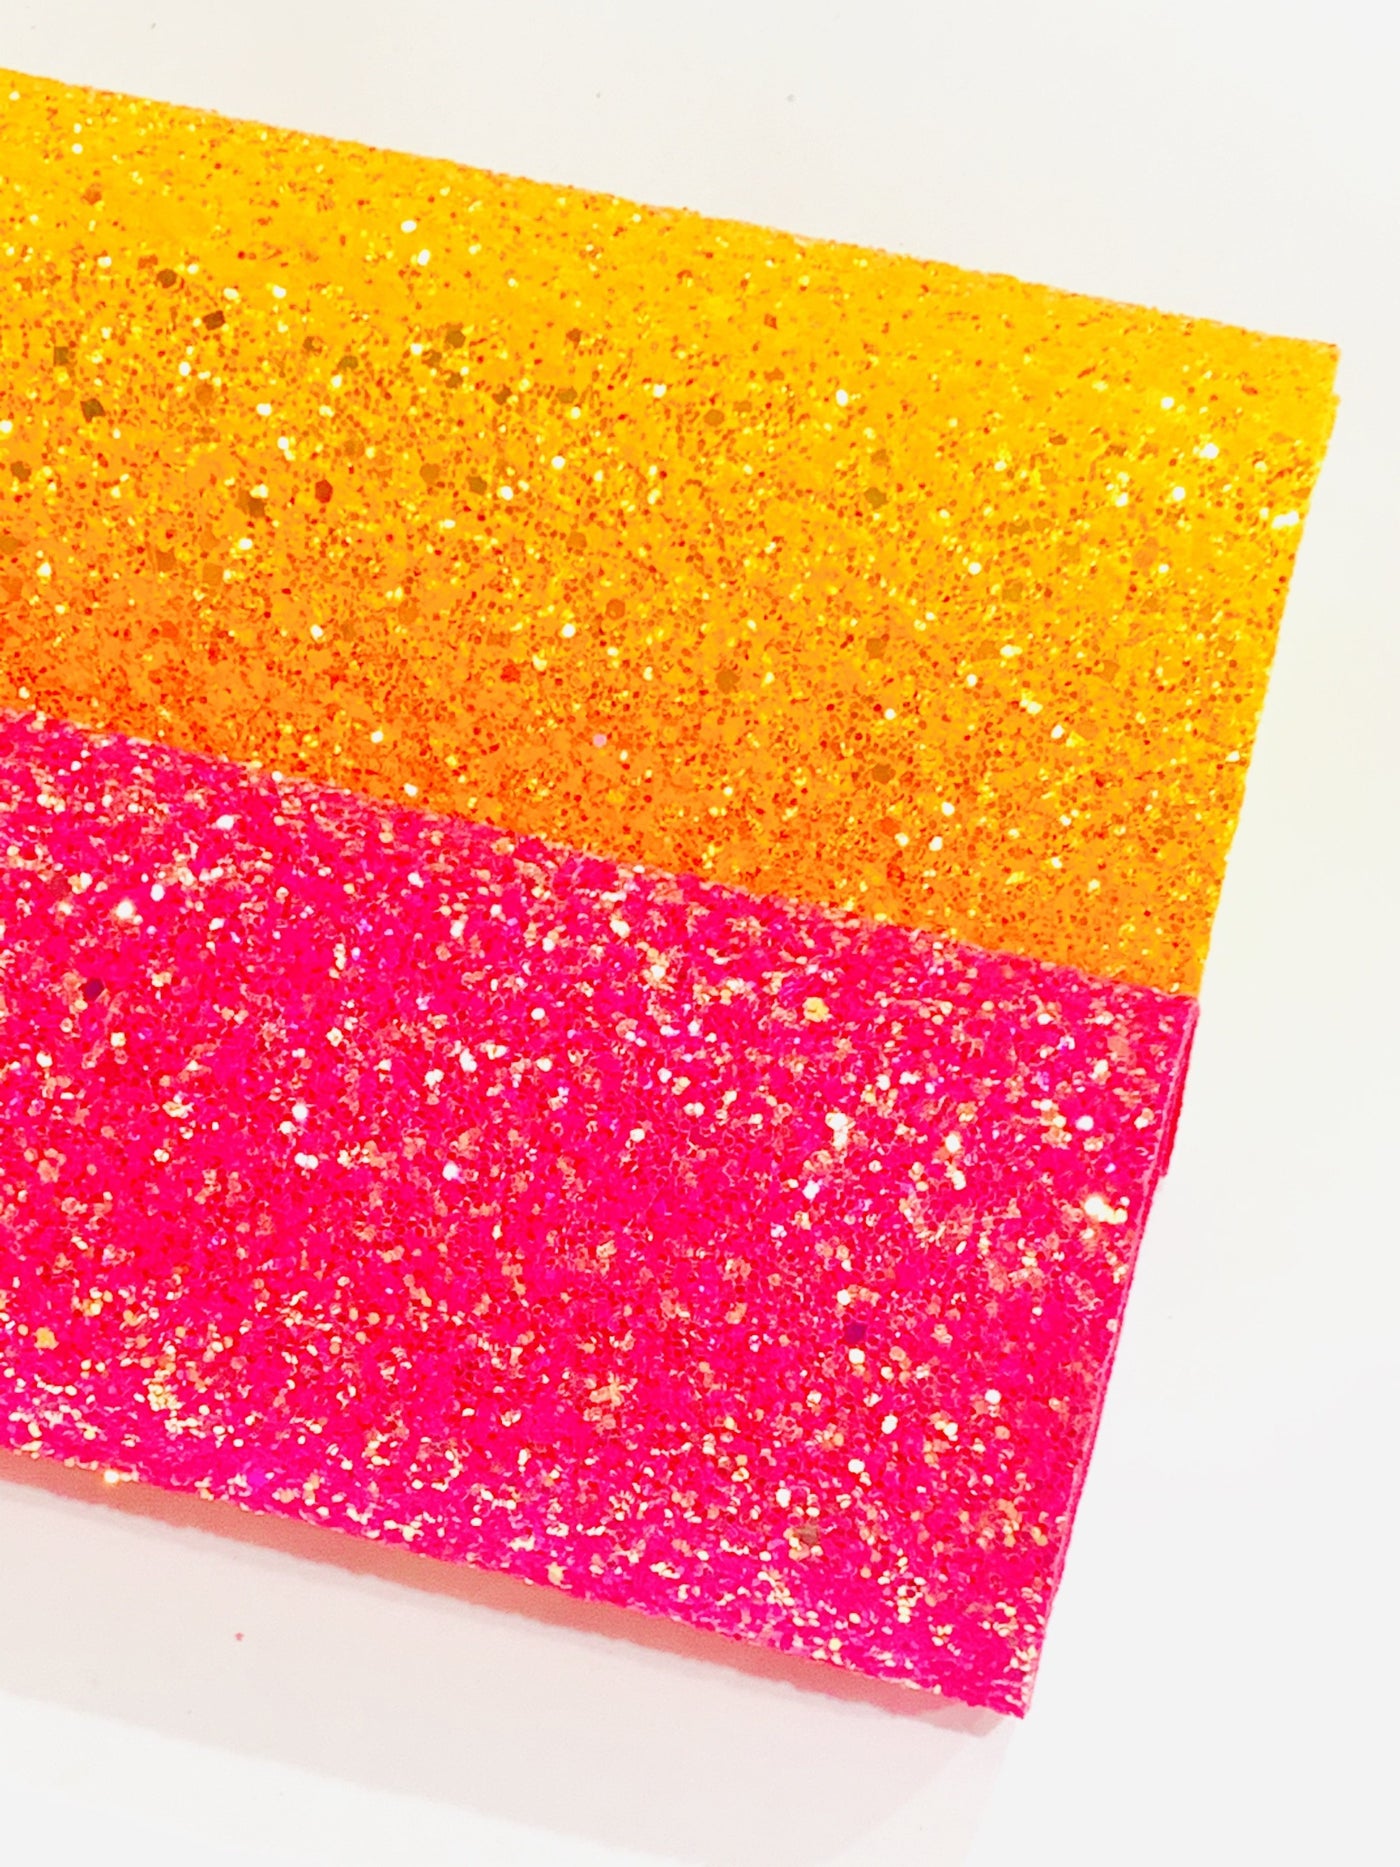 Hot Raspberry and Gold Chunky Glitter with Gold Reflective Flecks